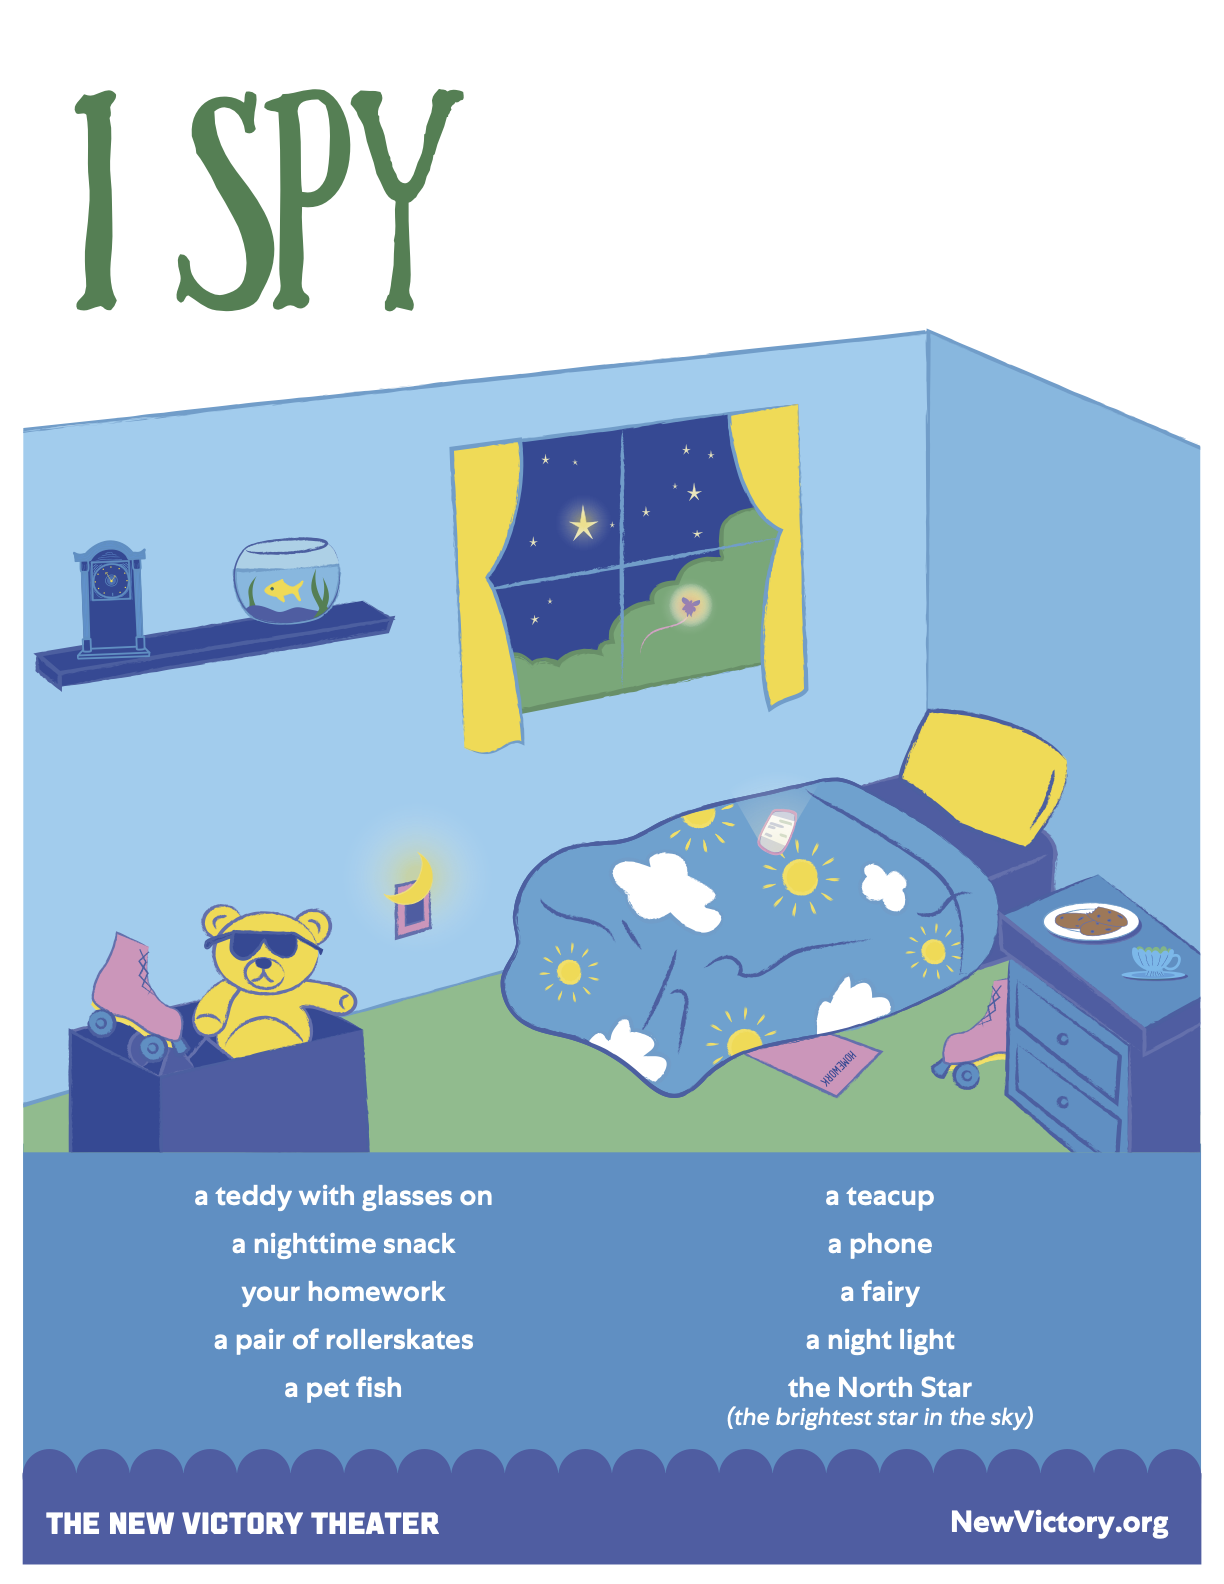 I Spy worksheet: an illustrated bedroom with the objects from the list scattered throughout